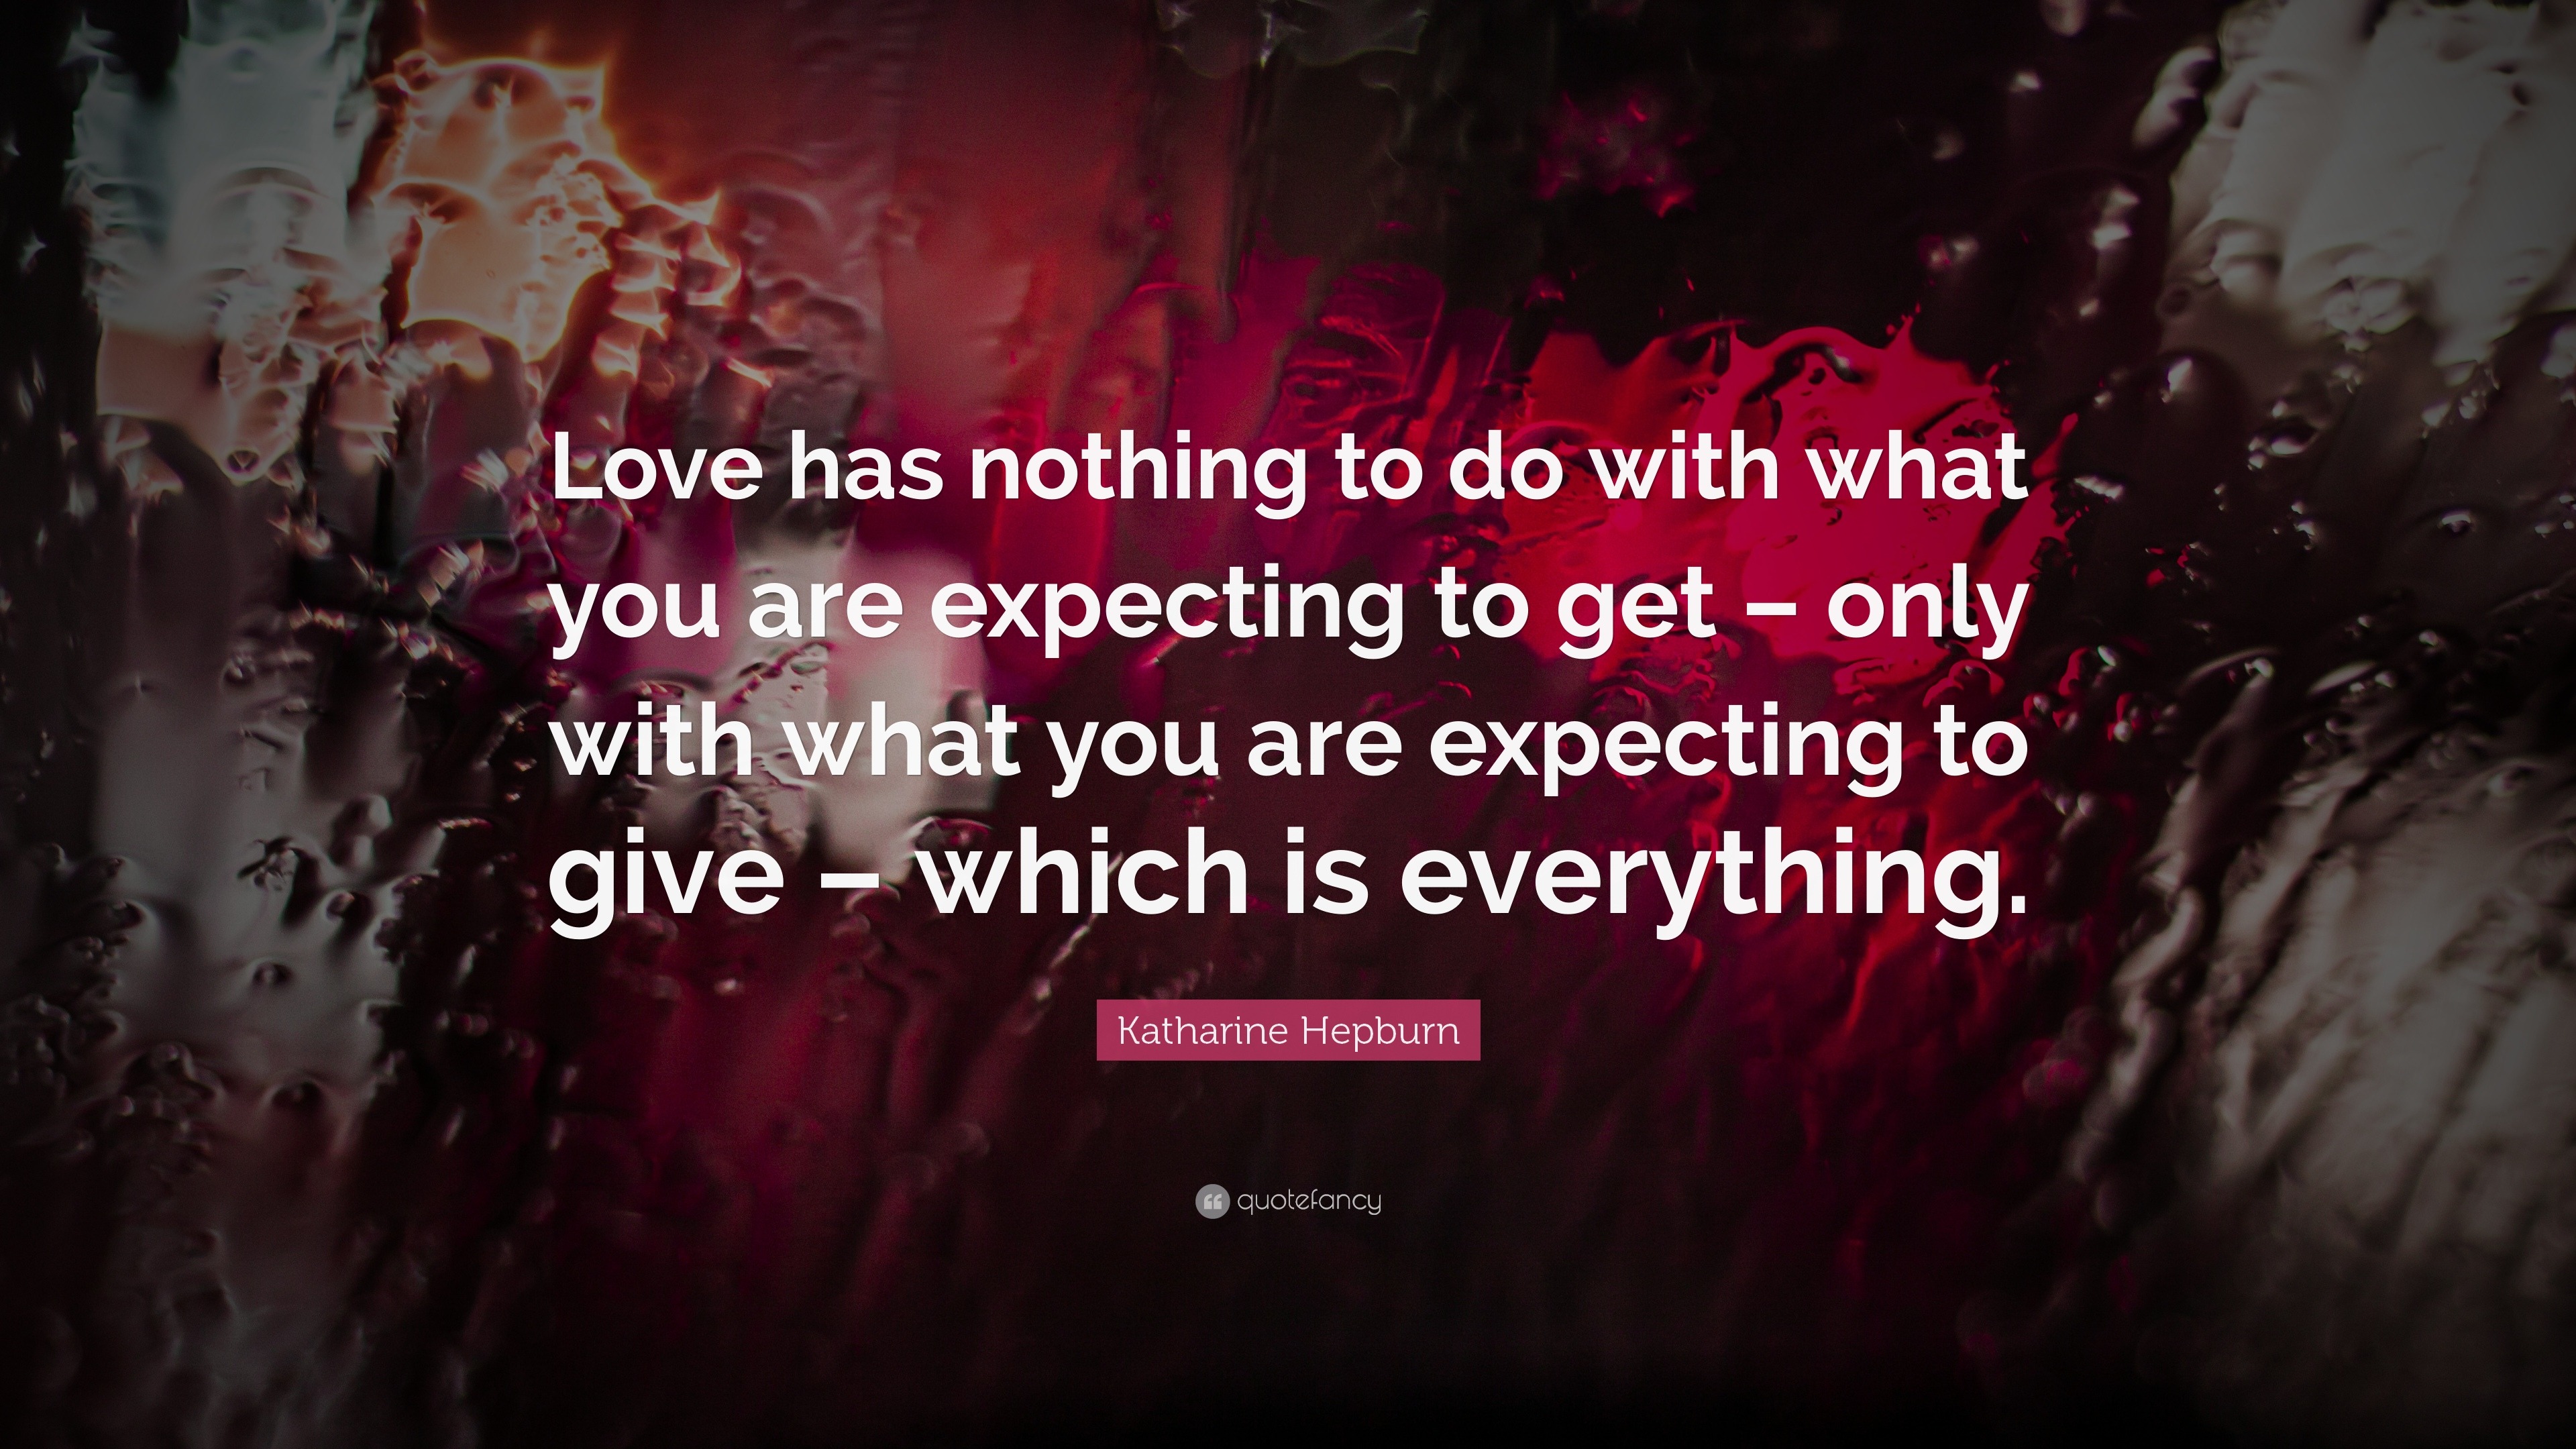 Katharine Hepburn Quote: "Love has nothing to do with what ...